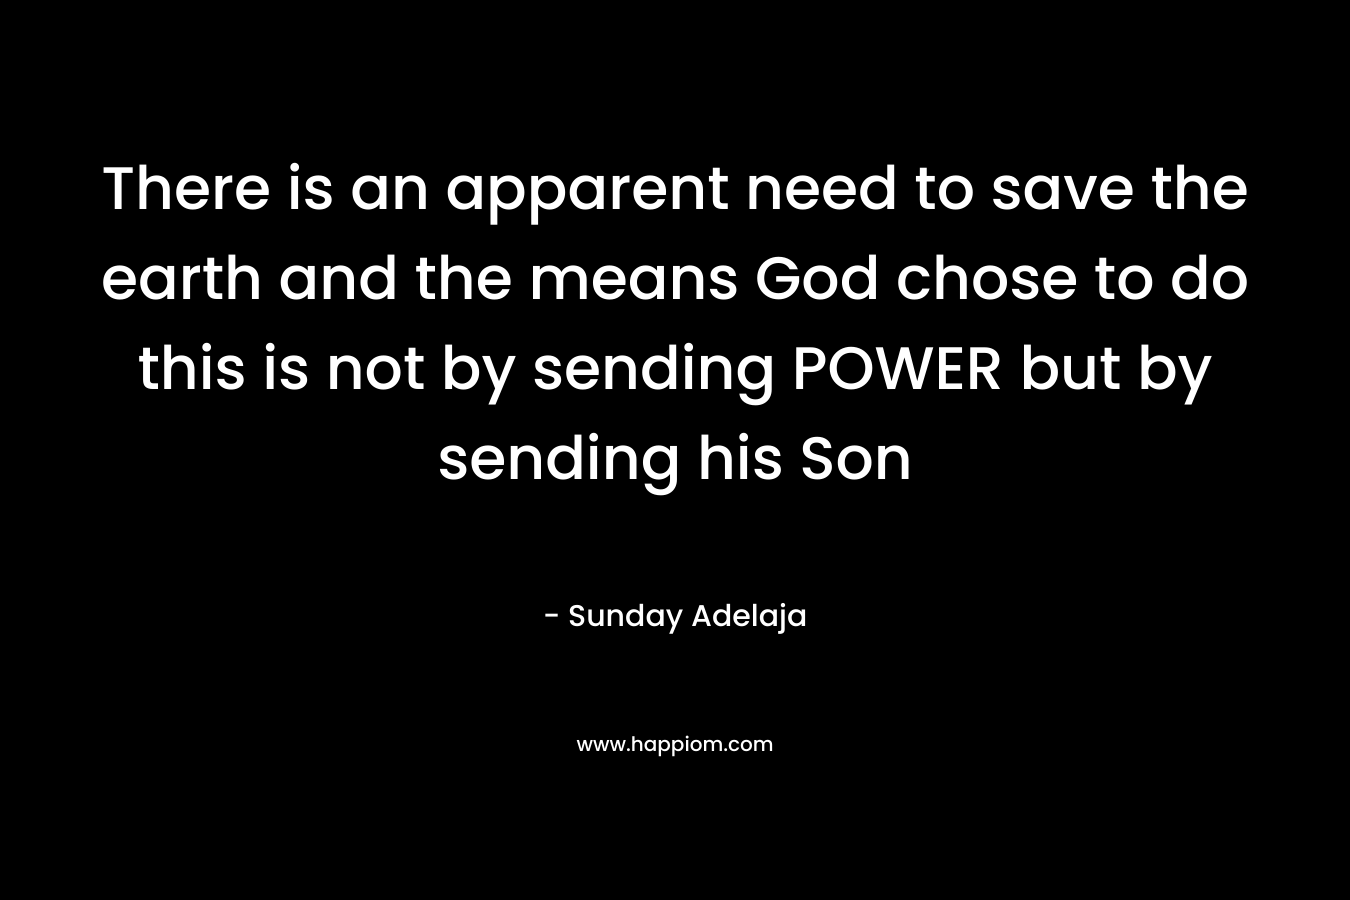 There is an apparent need to save the earth and the means God chose to do this is not by sending POWER but by sending his Son